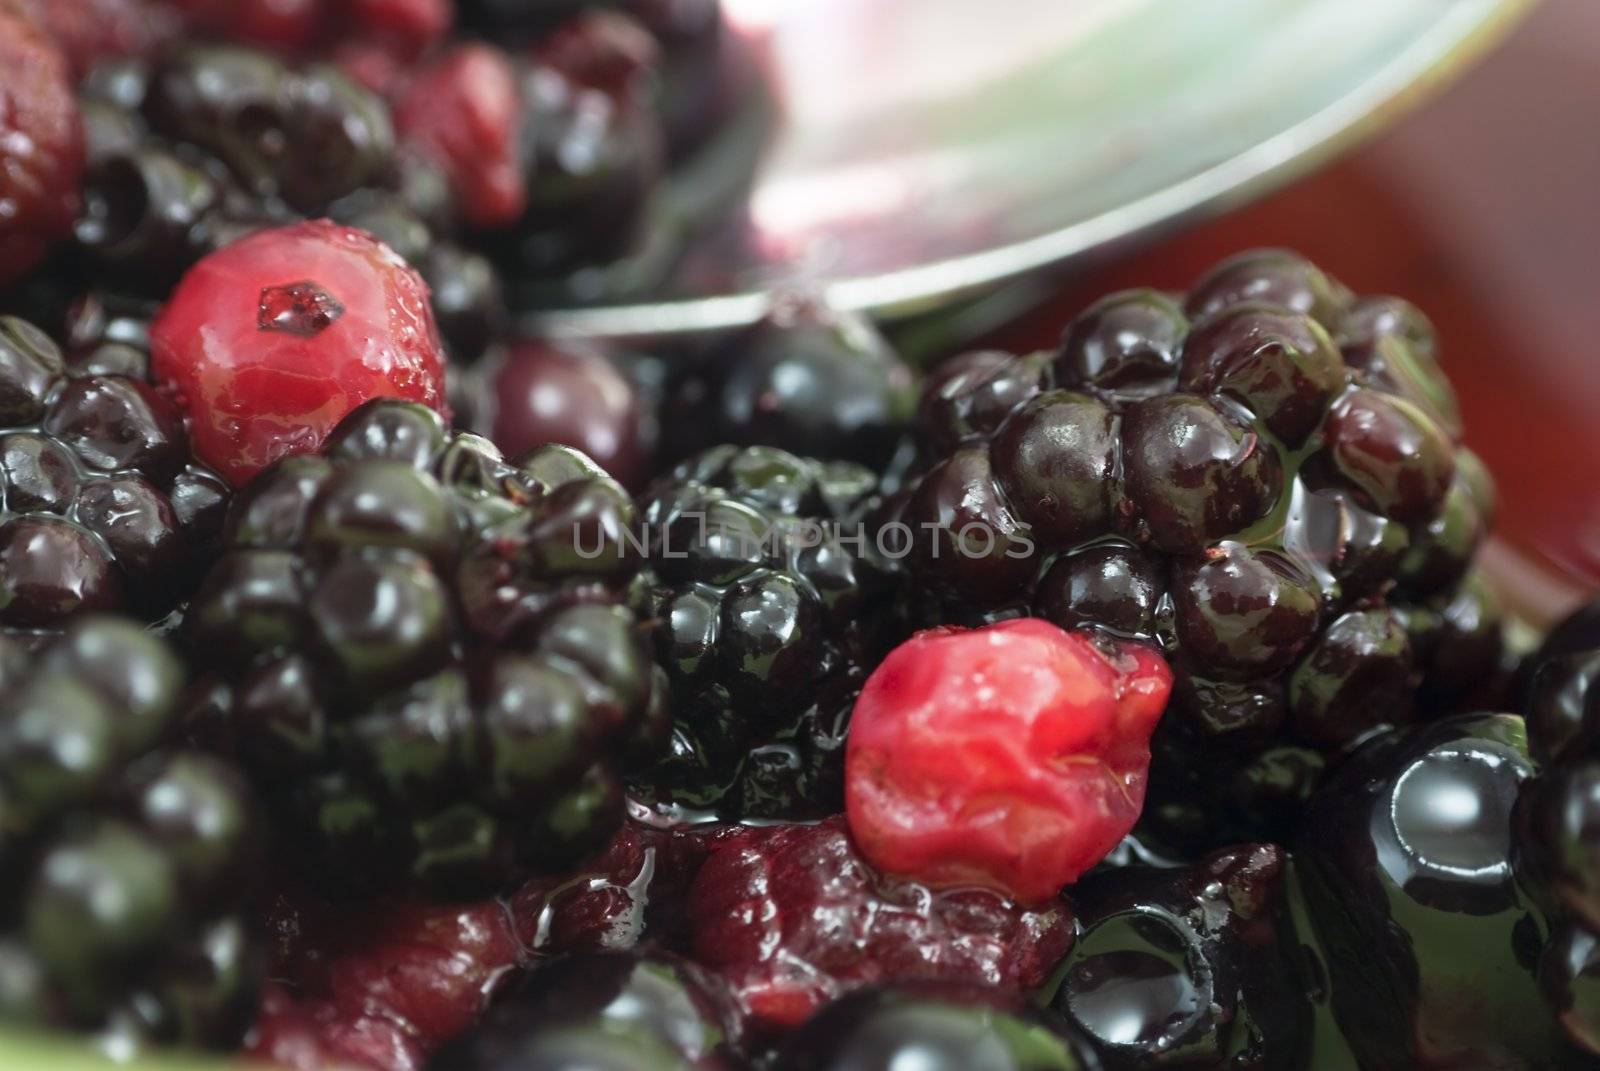 Closeup shot of summer fruits in a bowl, comprising blackberries, raspberries, redcurrants and blackcurrants in their own juice.  A spoon scoops some berries in soft focus in the background.